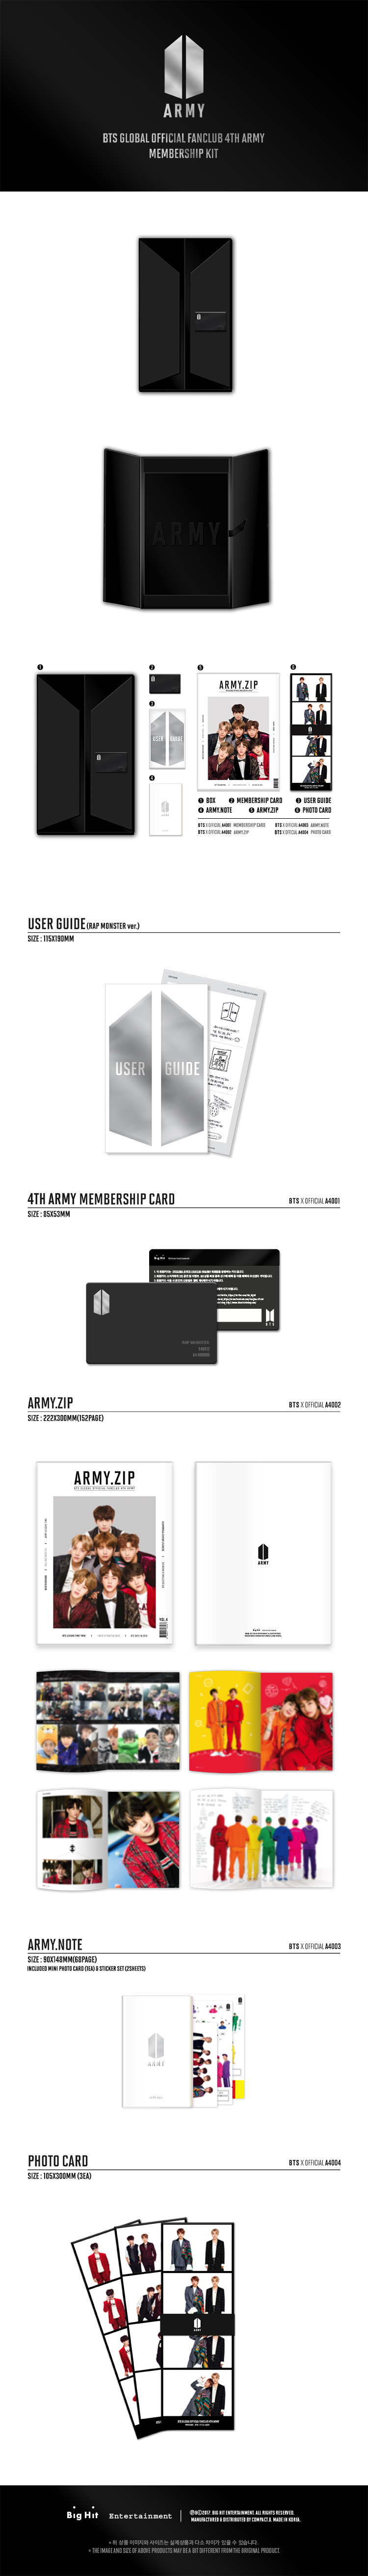 INFO] Shipping Information for BTS Global Official Fanclub ARMY 